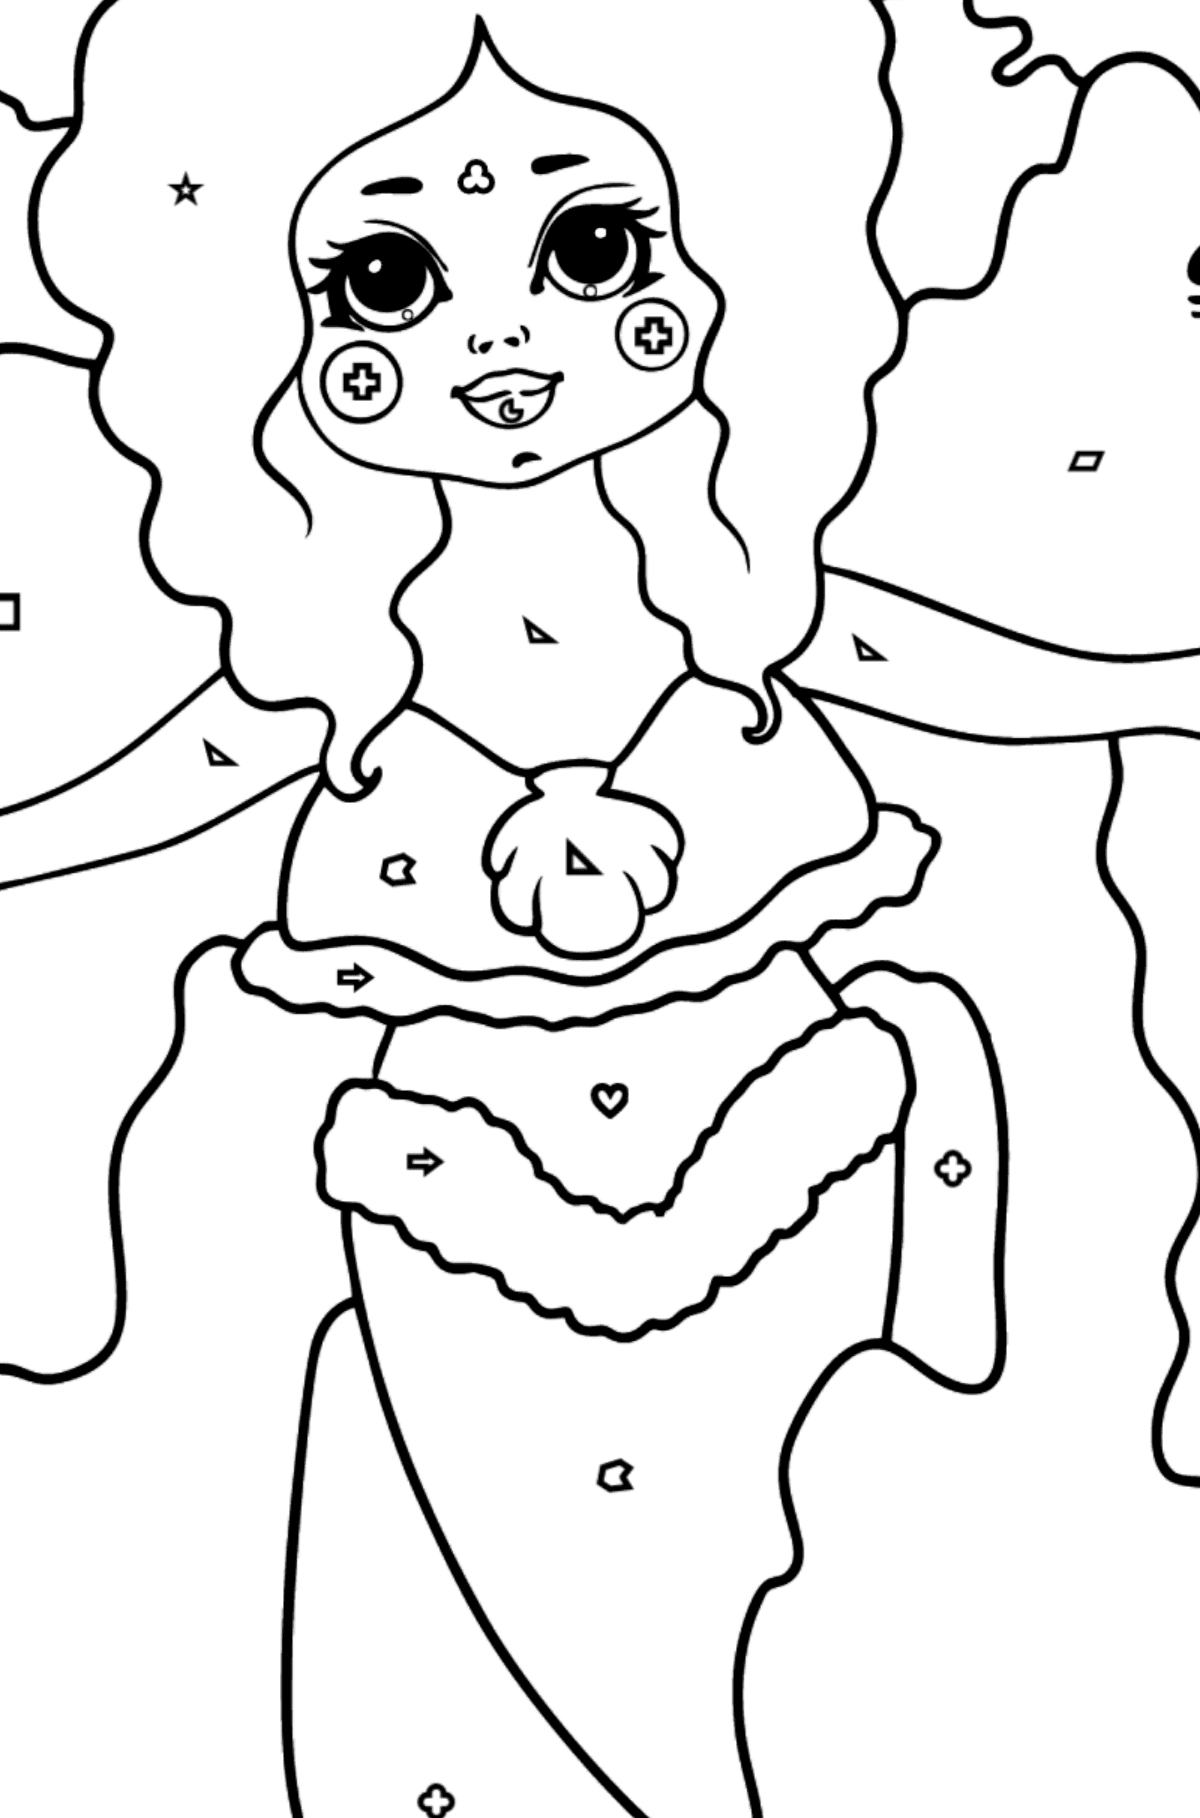 Mermaid and Colorful Corals coloring page - Coloring by Geometric Shapes for Kids